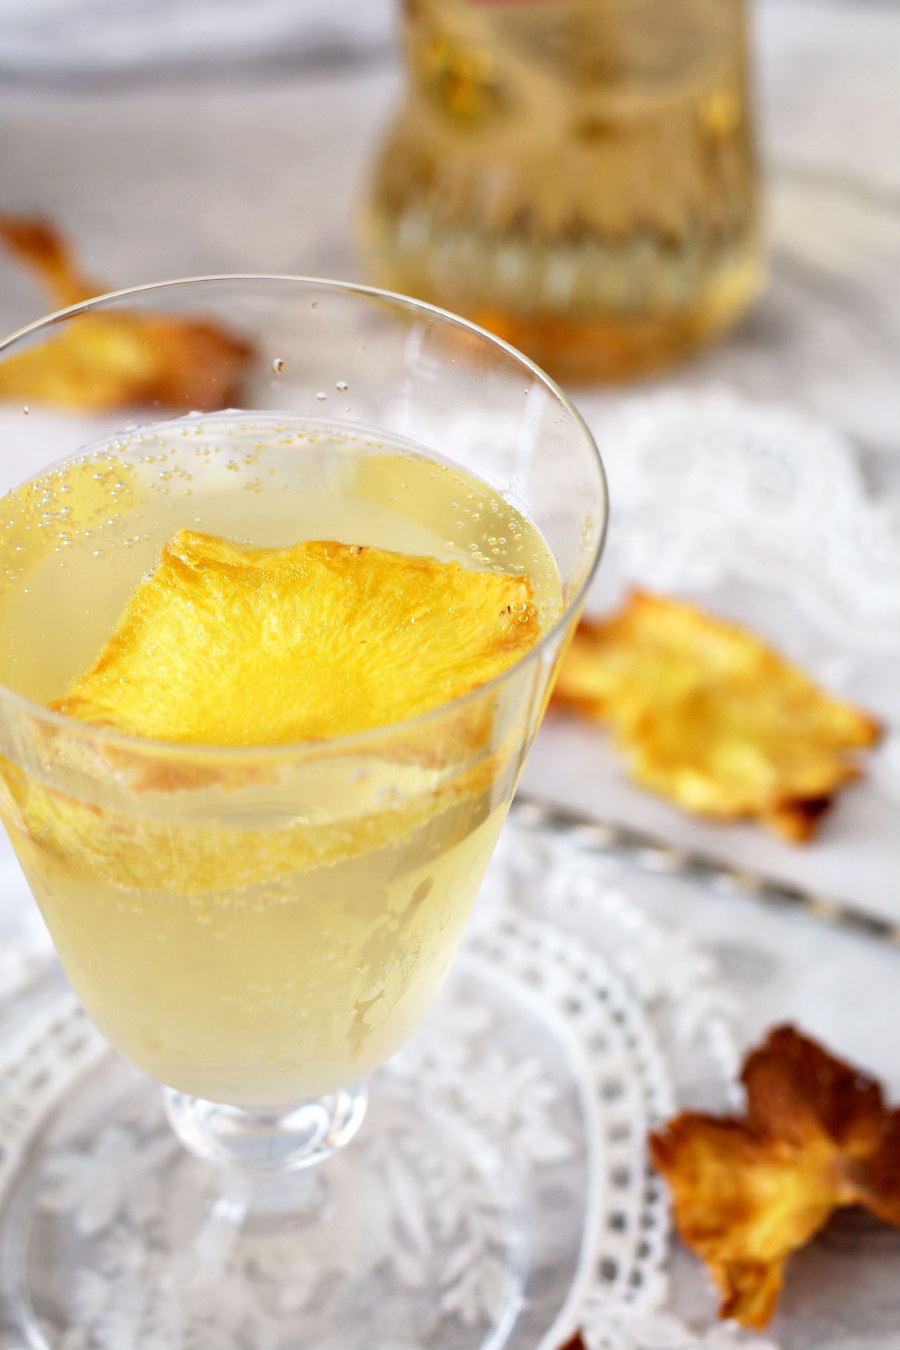 Passion Fruit Pineapple Spritz topped with pineapple flower garnish.